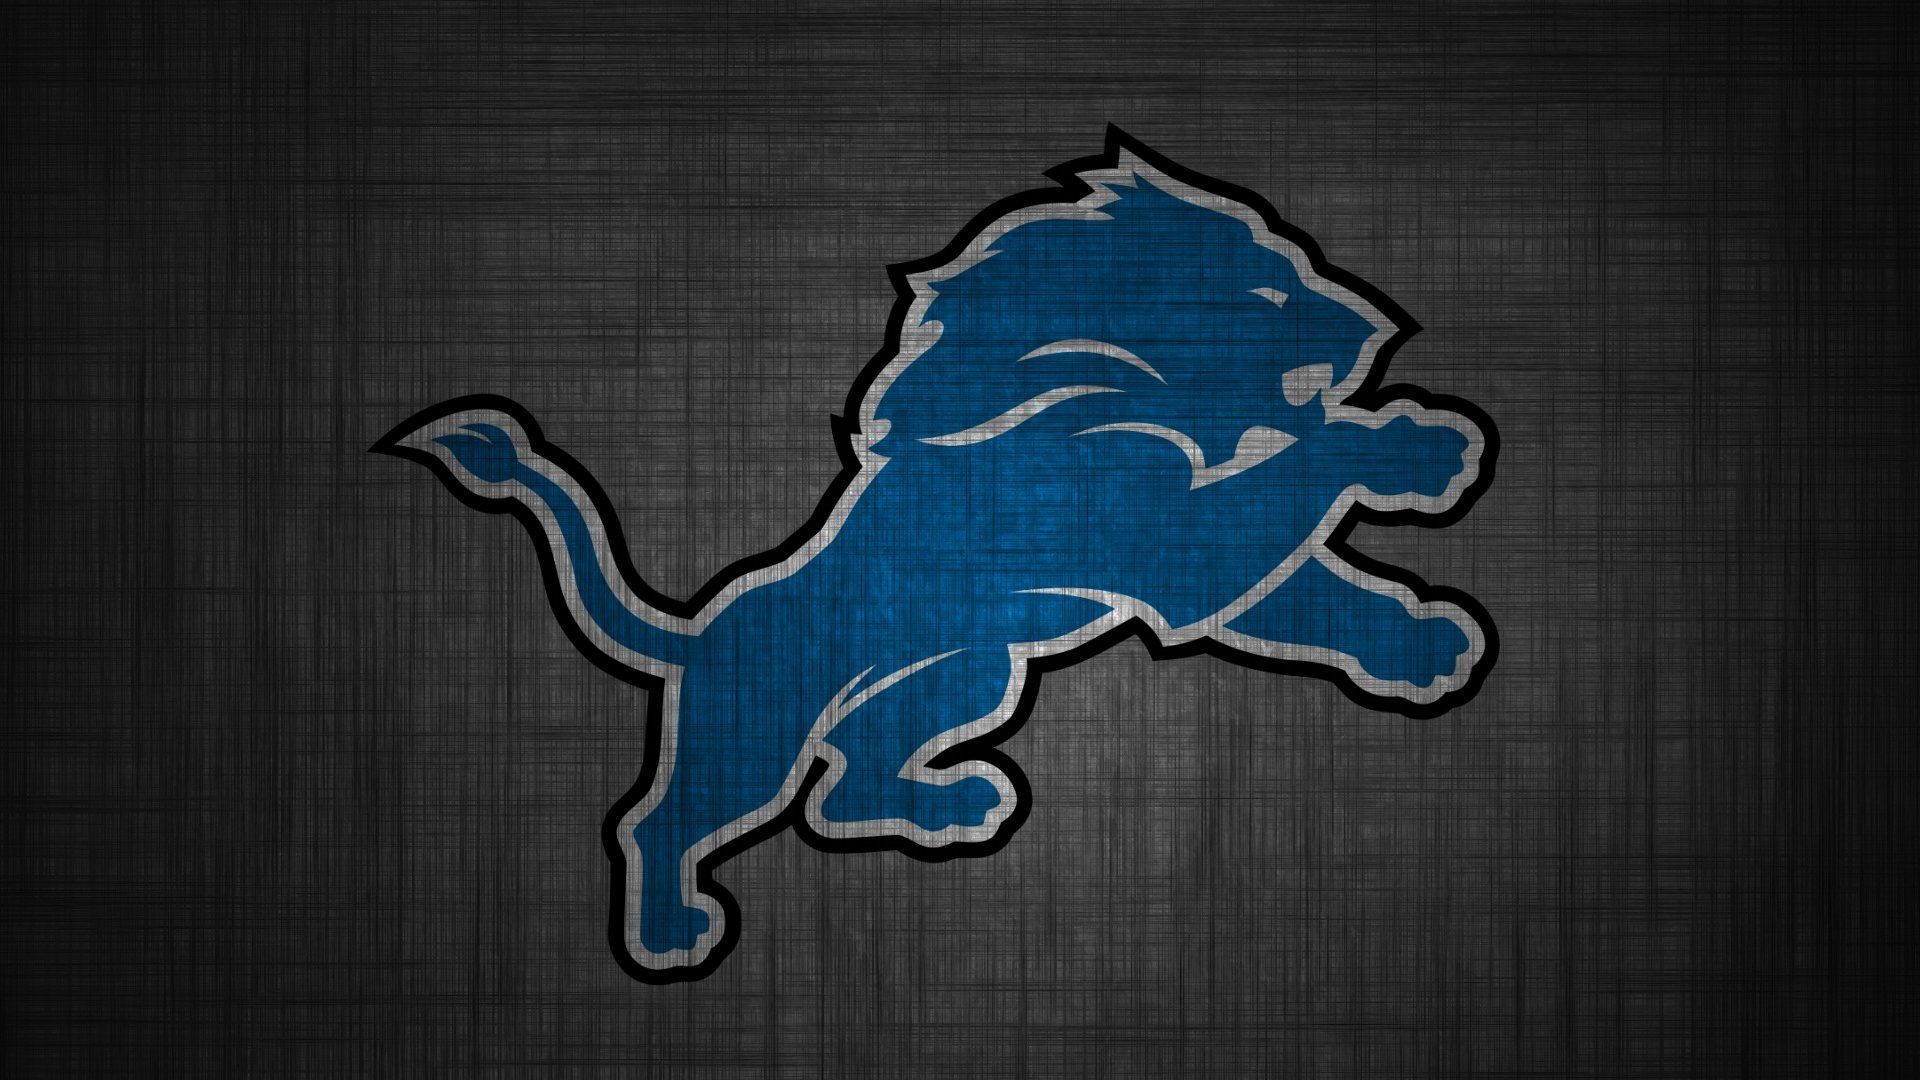 Detroit Lions Wallpaper For Mac OS with high-resolution 1920x1080 pixel. Download and set as wallpaper for Desktop Computer, Apple iPhone X, XS Max, XR, 8, 7, 6, SE, iPad, Android